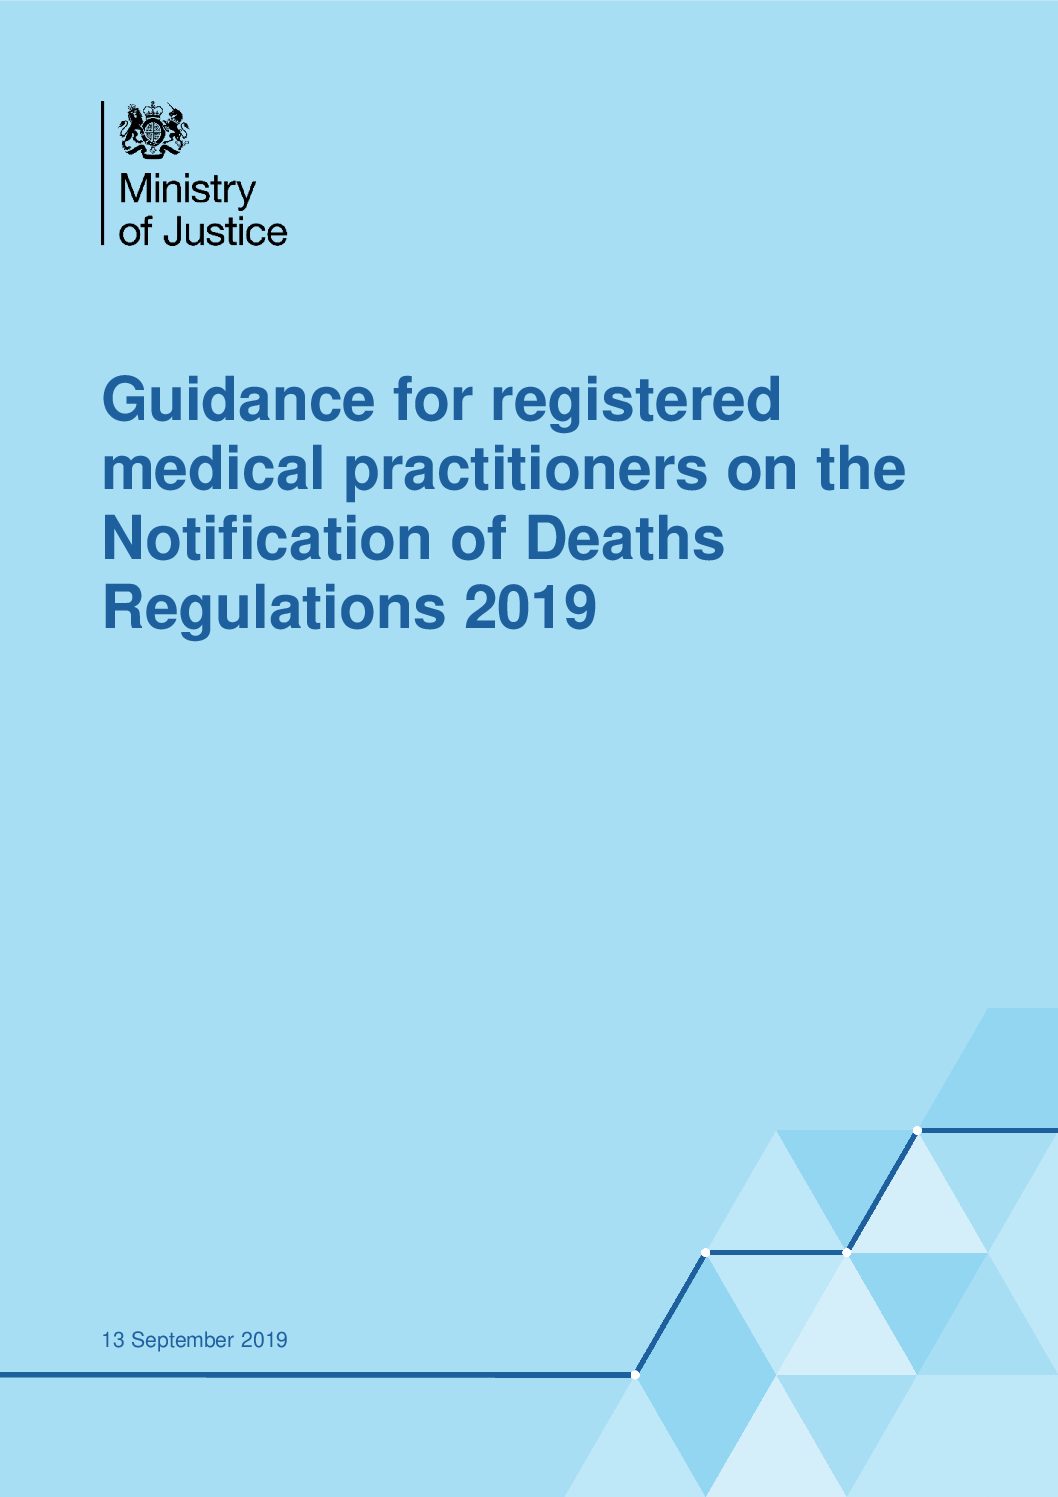 Guidance for registered medical practitioners on the Notification of Death Regulations 2019